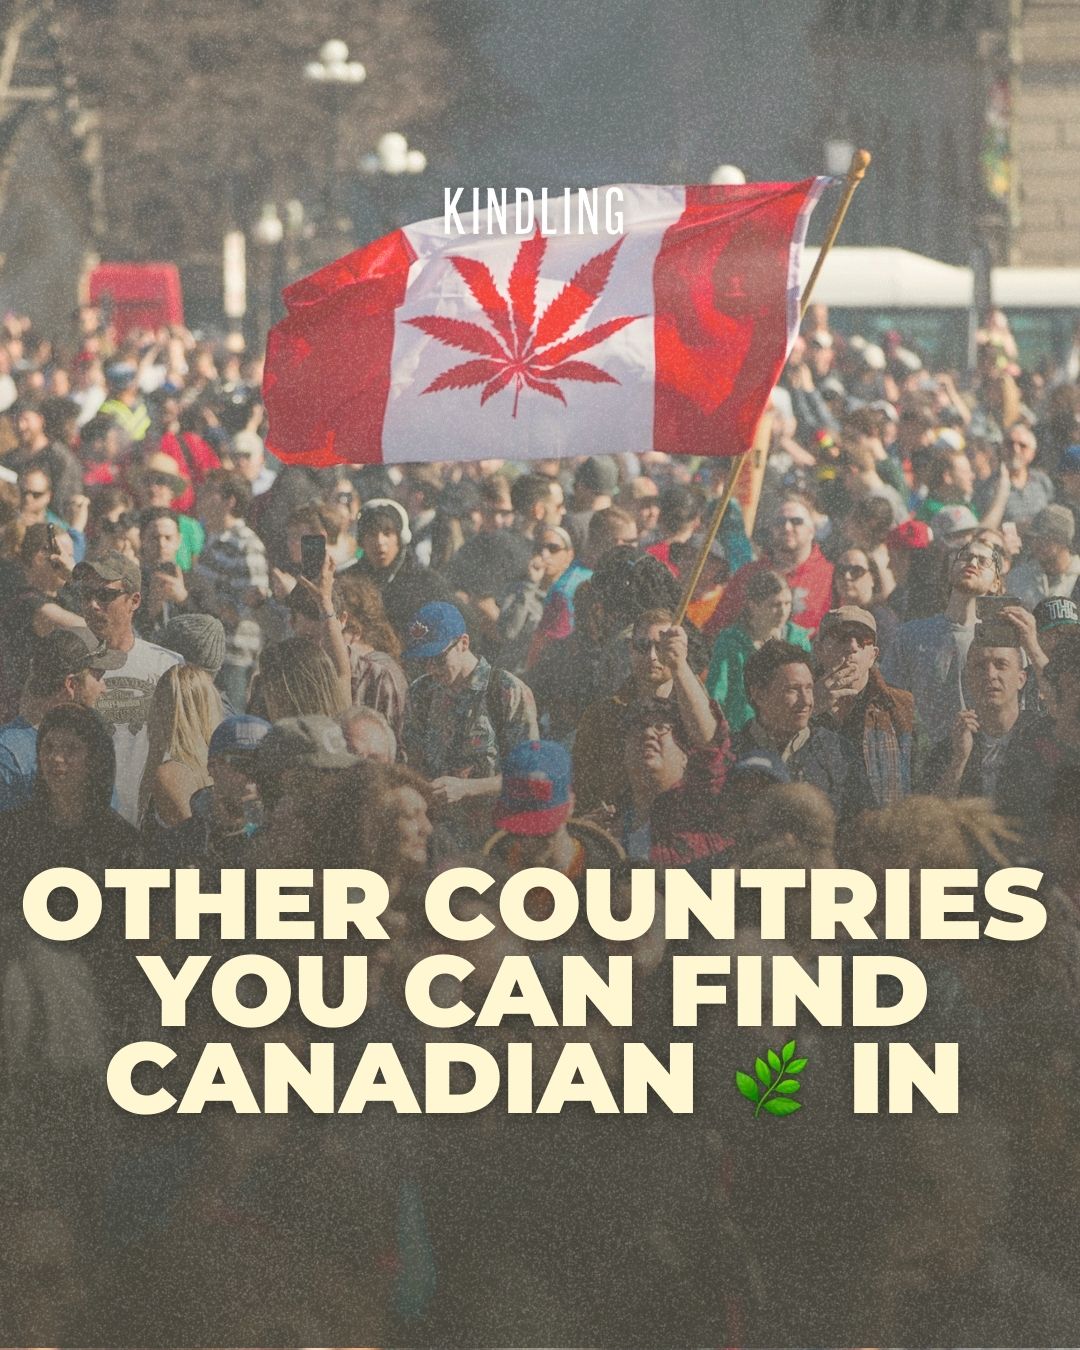 Other Countries You Can Find Canadian Cannabis In